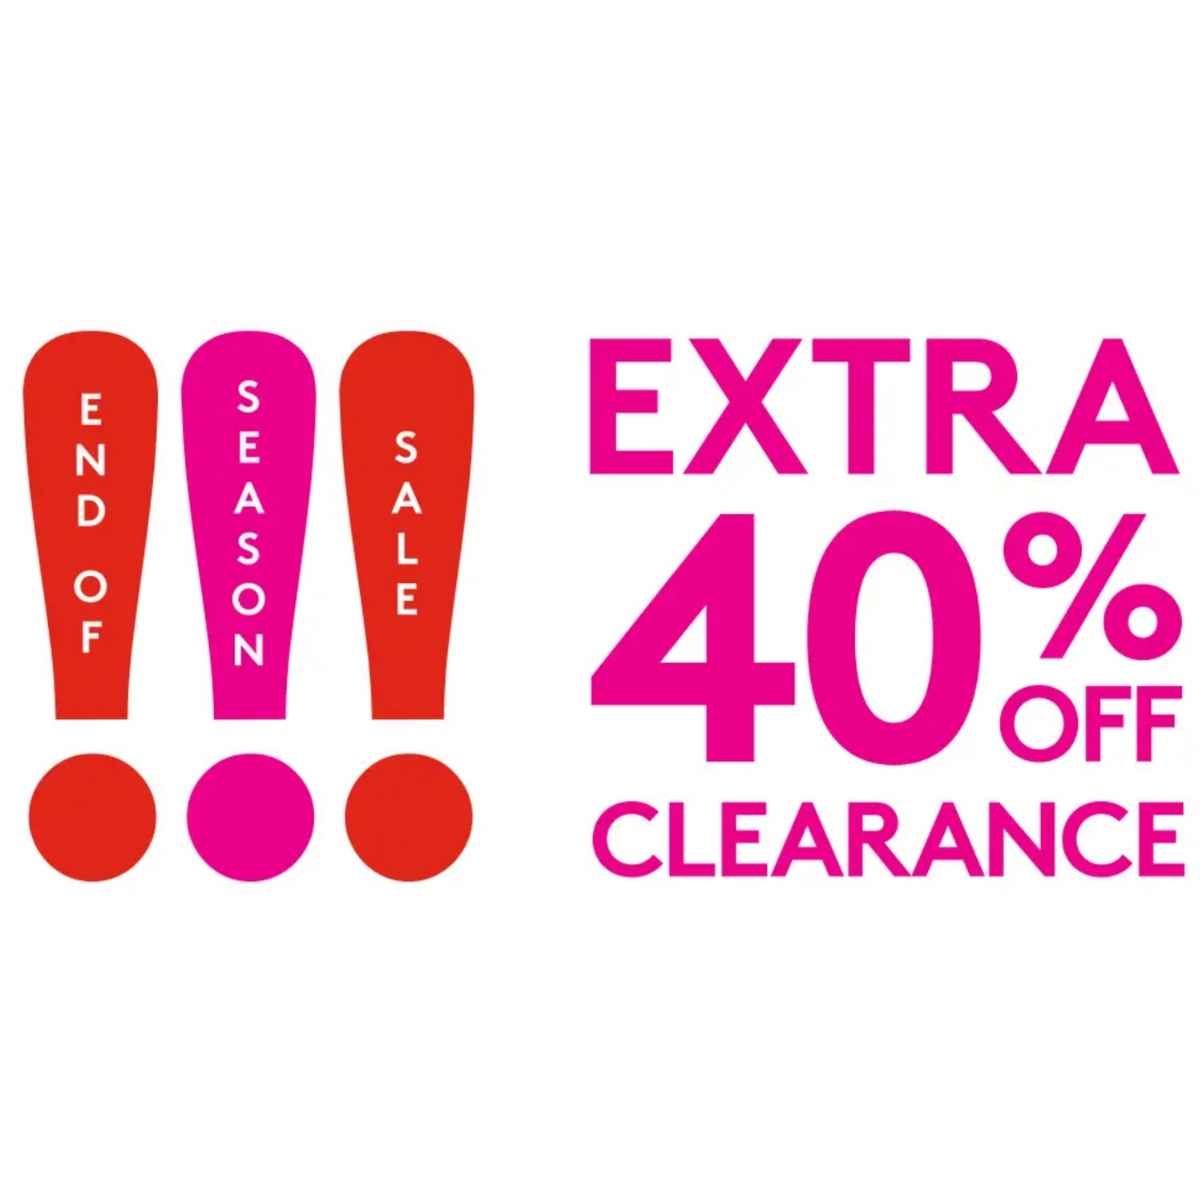 Here's NORDSTROM RACK's next Clearance Sale! 